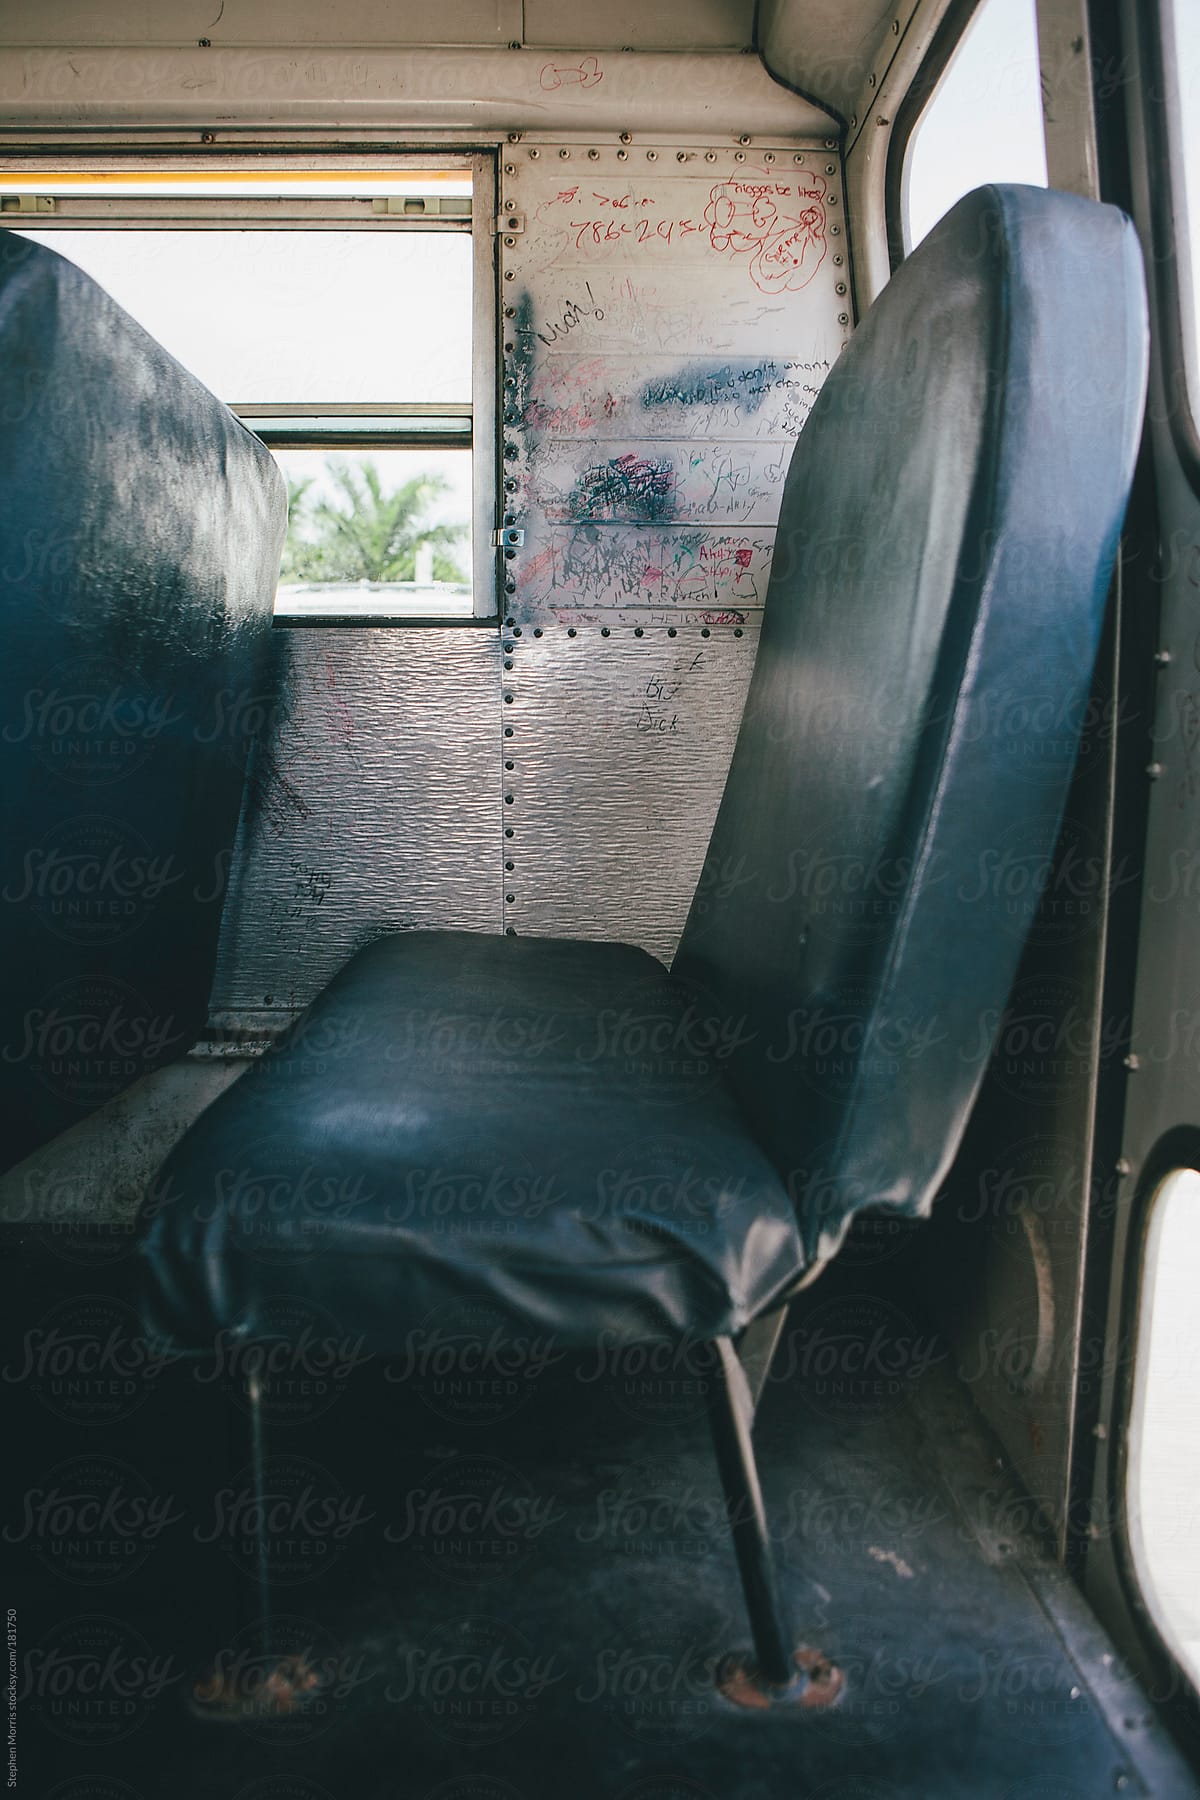 Back seat of old school bus